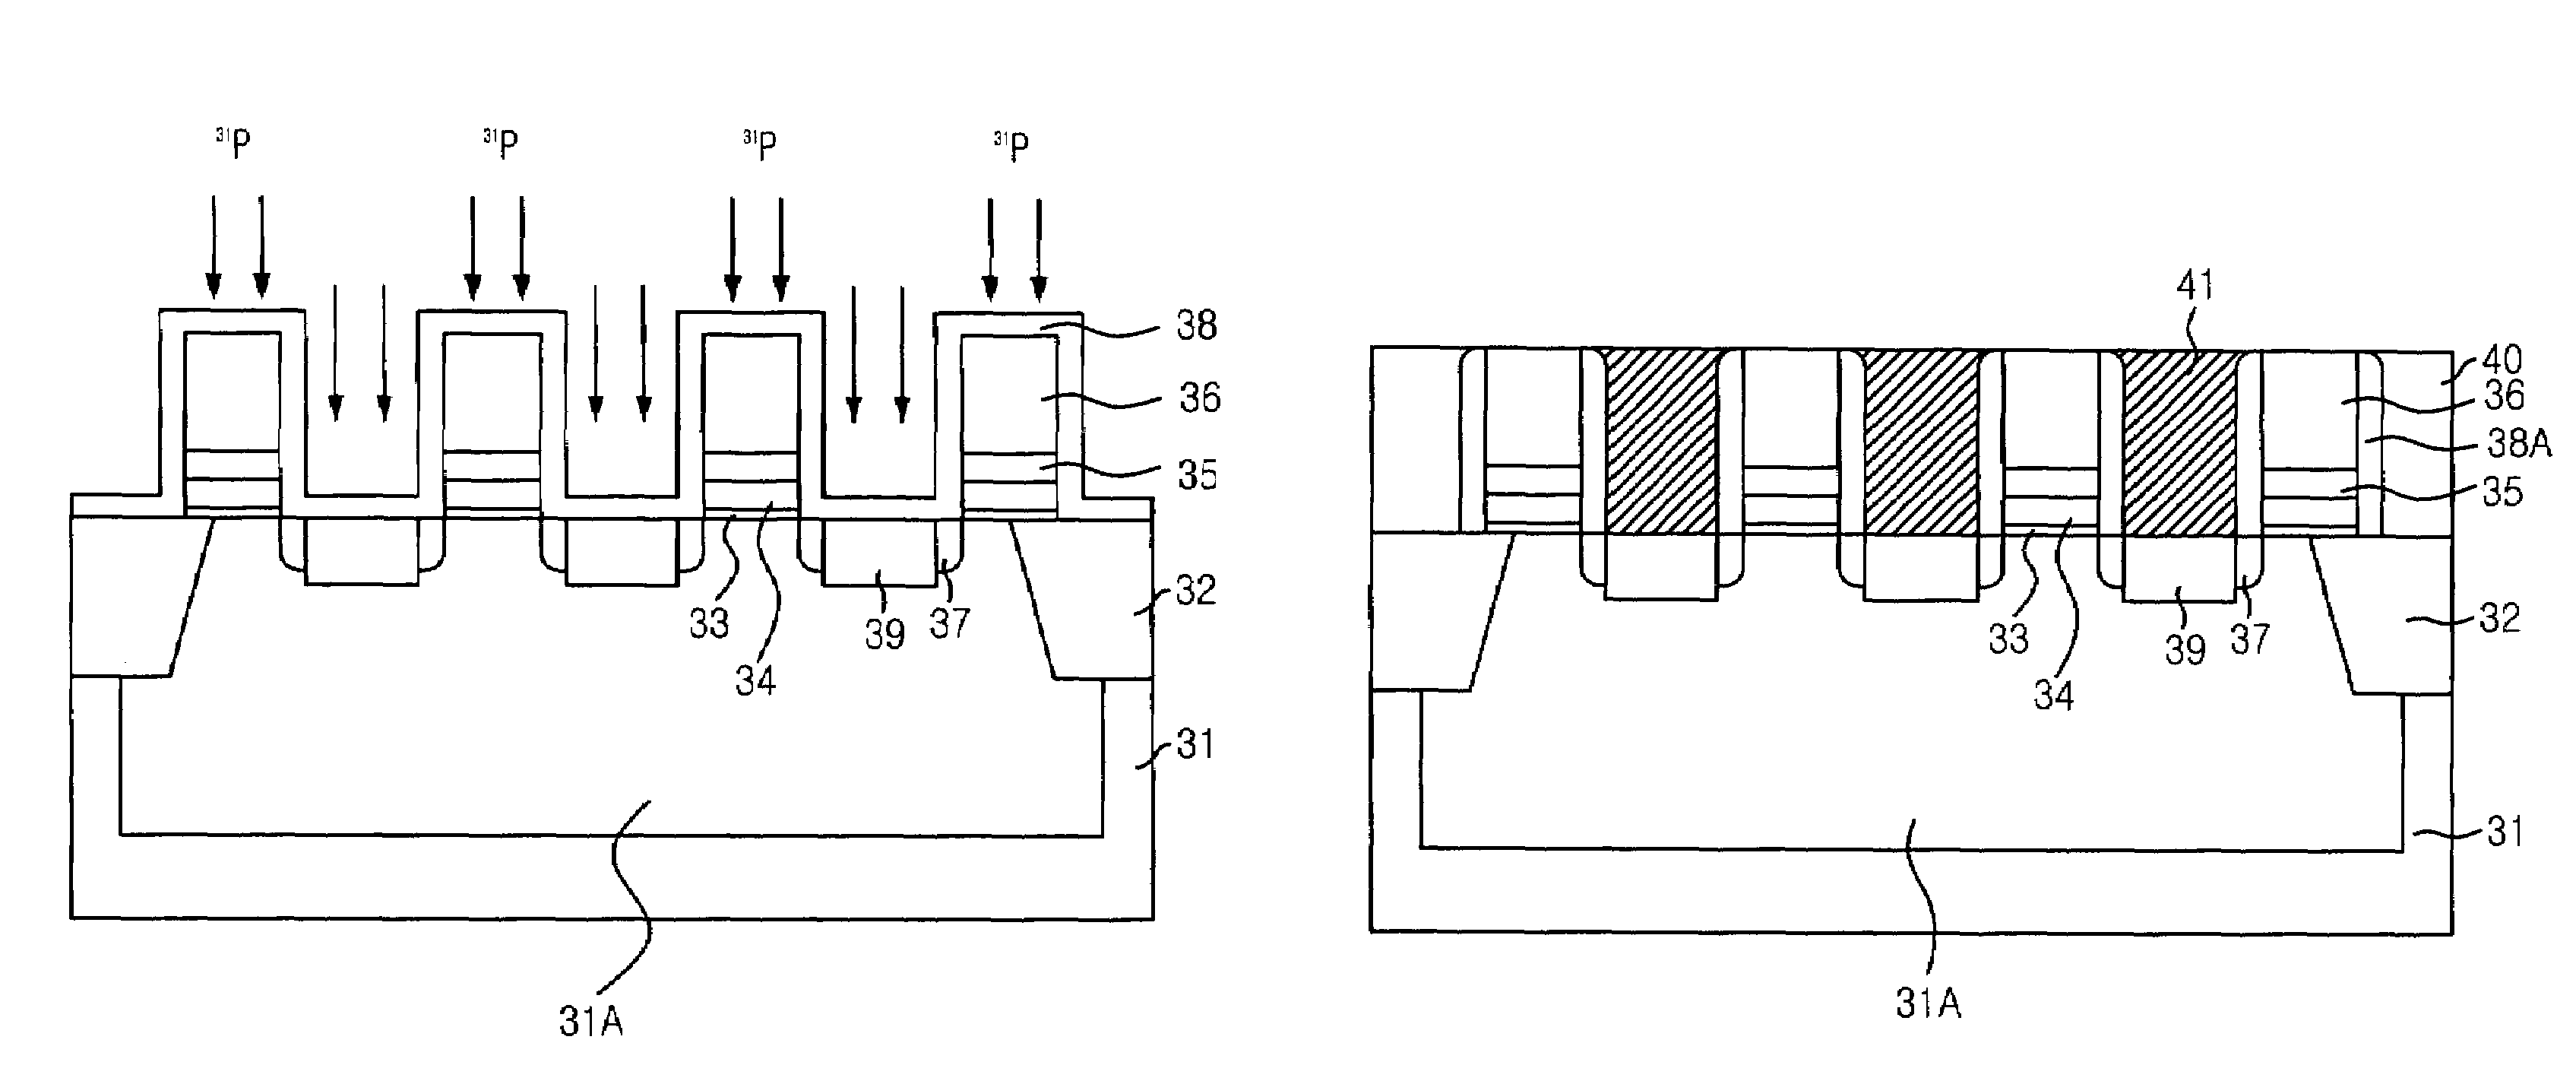 Method for fabricating semiconductor device with improved refresh time